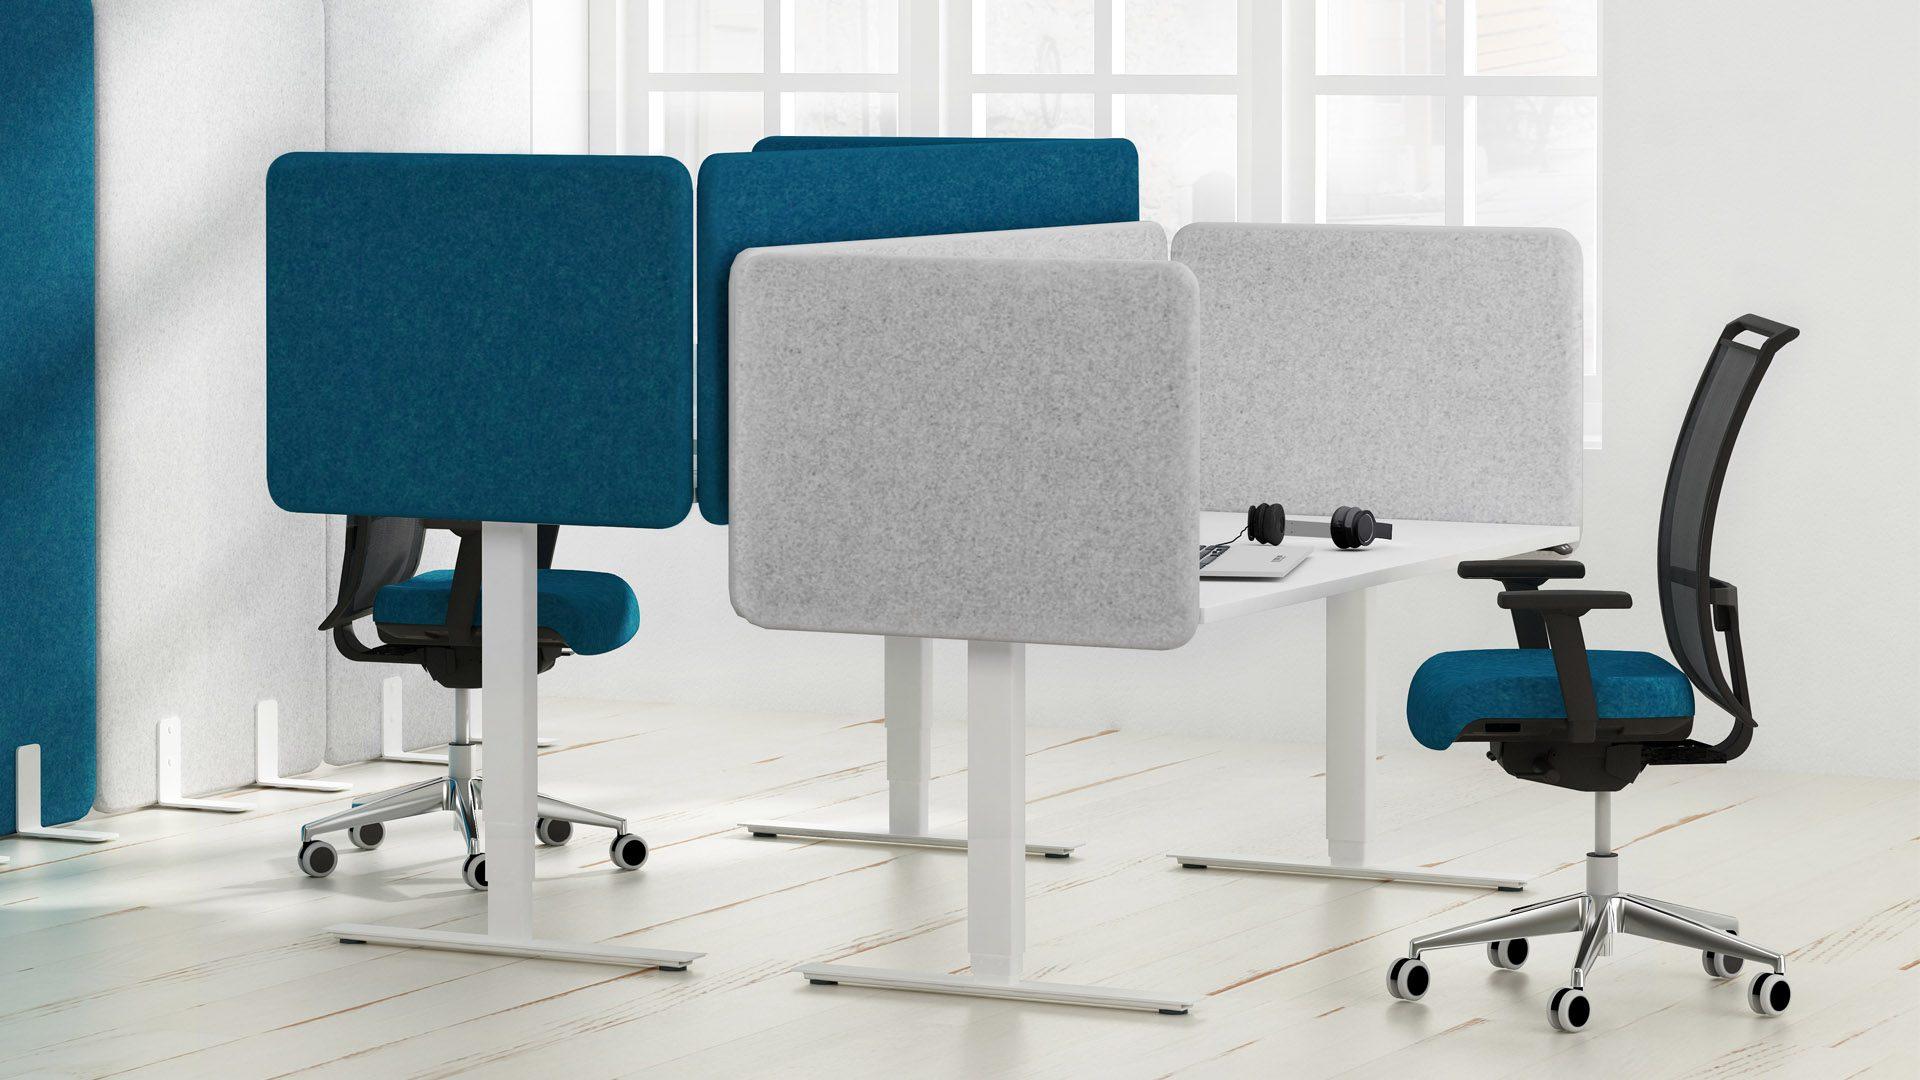 Top 530 acoustic desk screens add privacy to your workplace and absorb background office noise